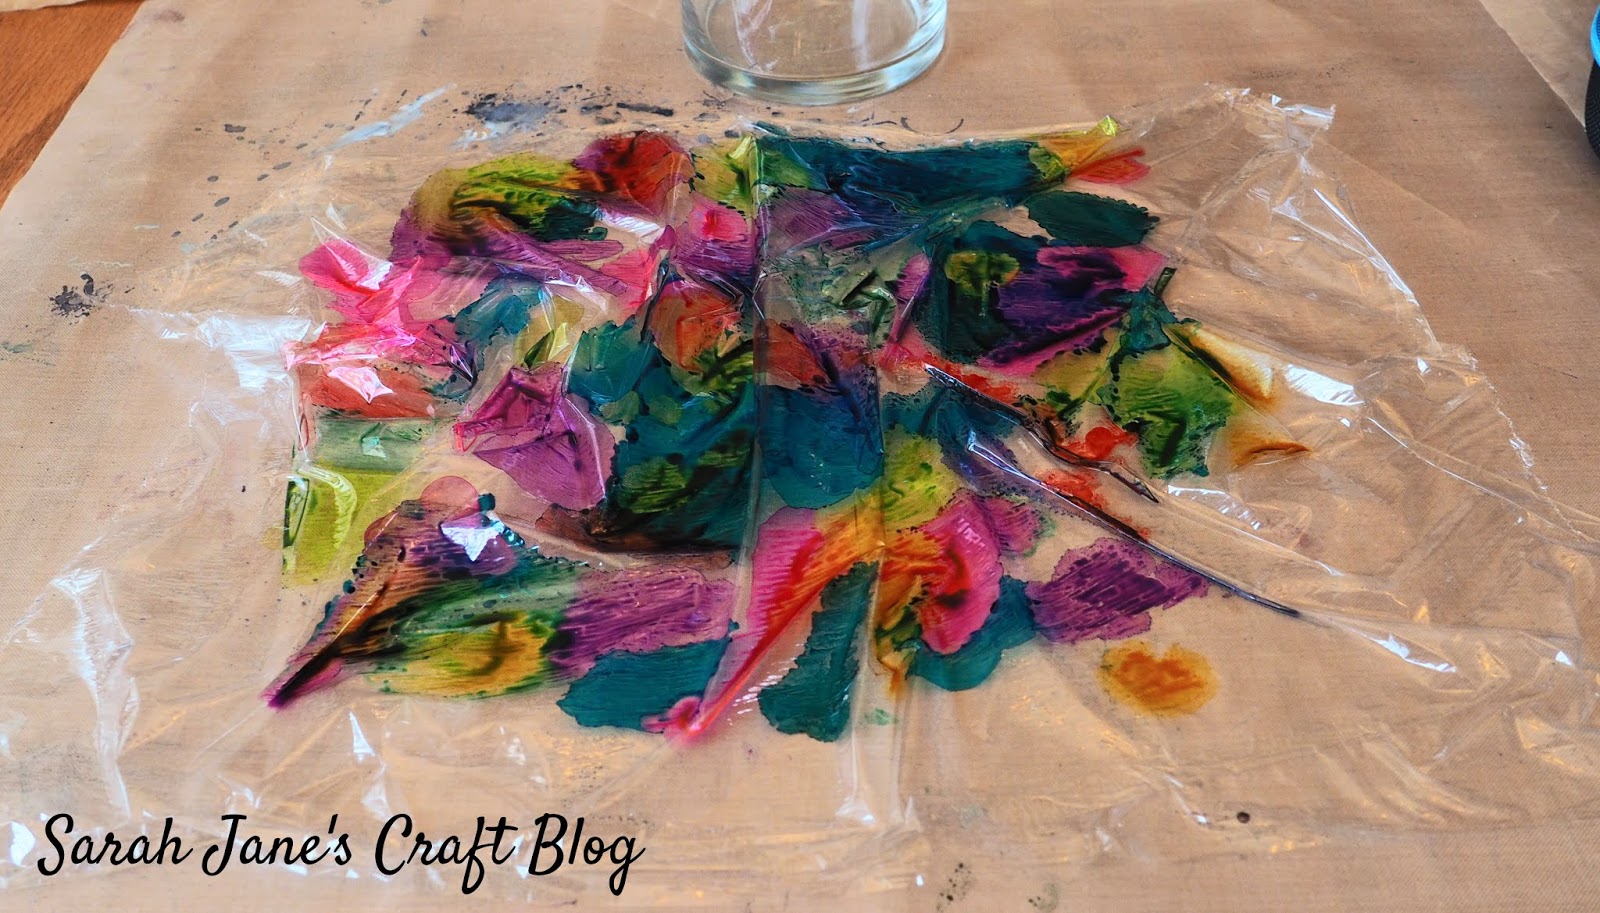 Fun alcohol ink painting project using very few supplies.